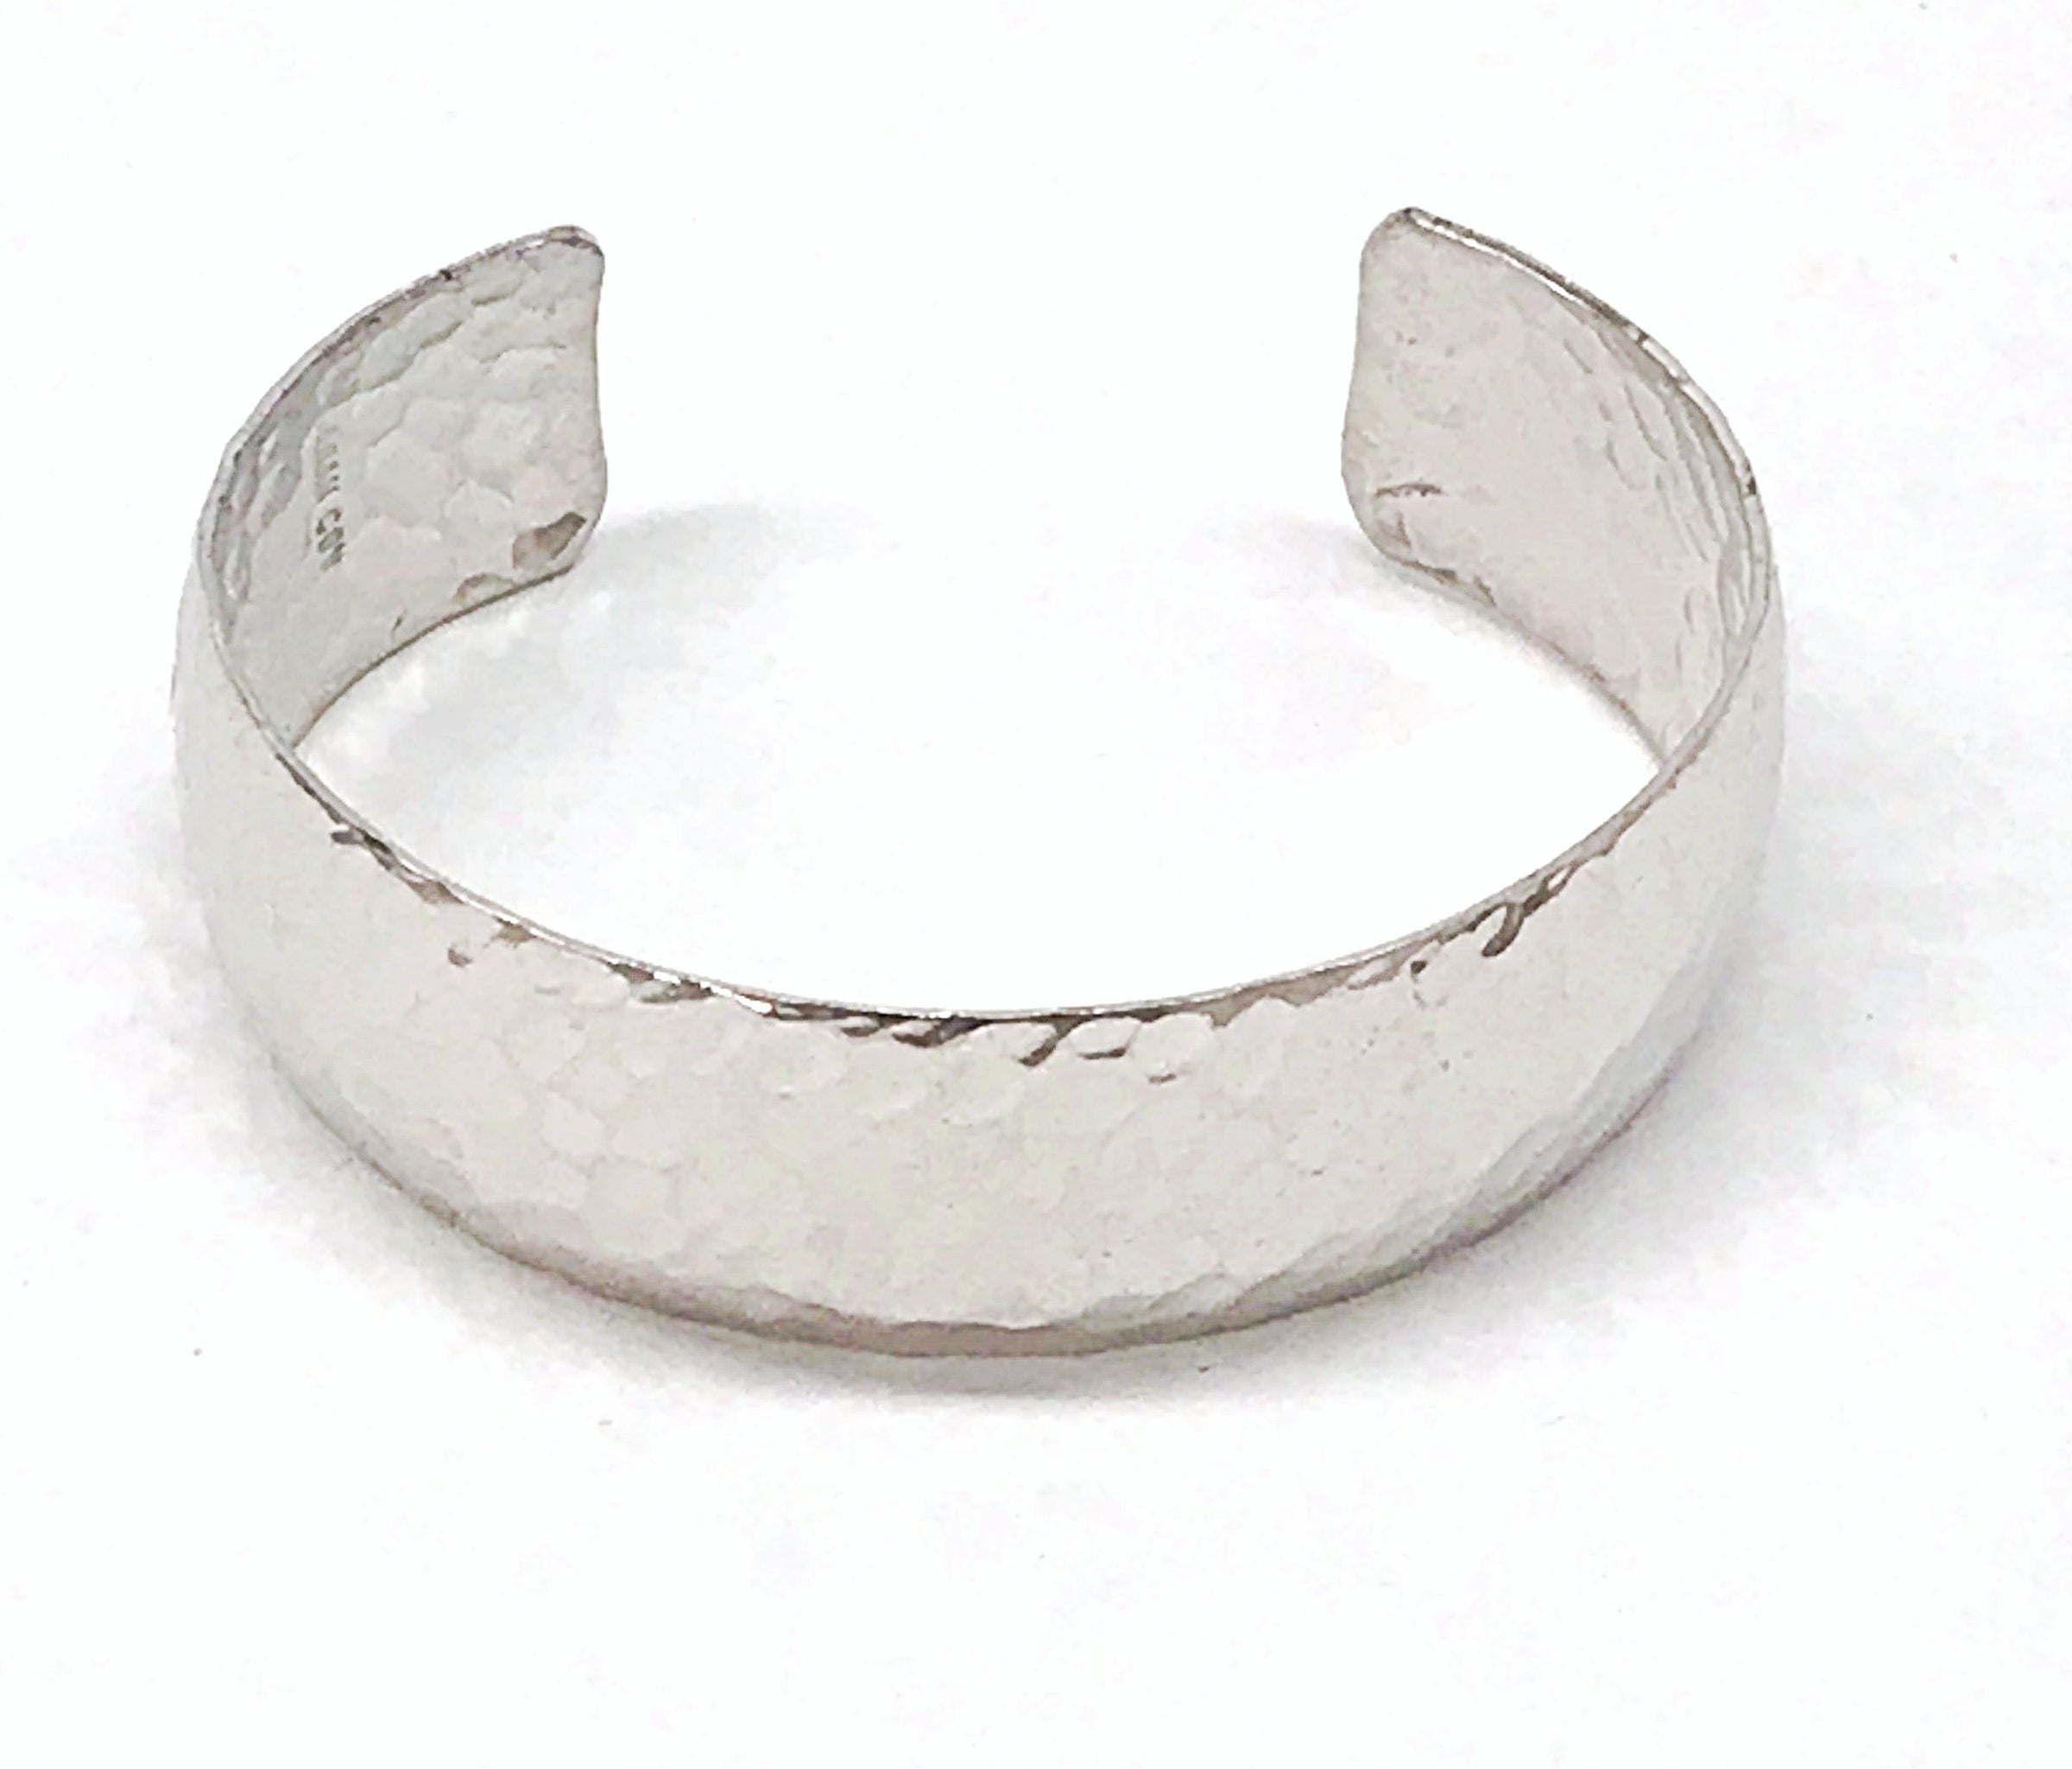 Cuff Sarah Coventry Hers and Hammered Treasures Tone His Silver – Bracelet